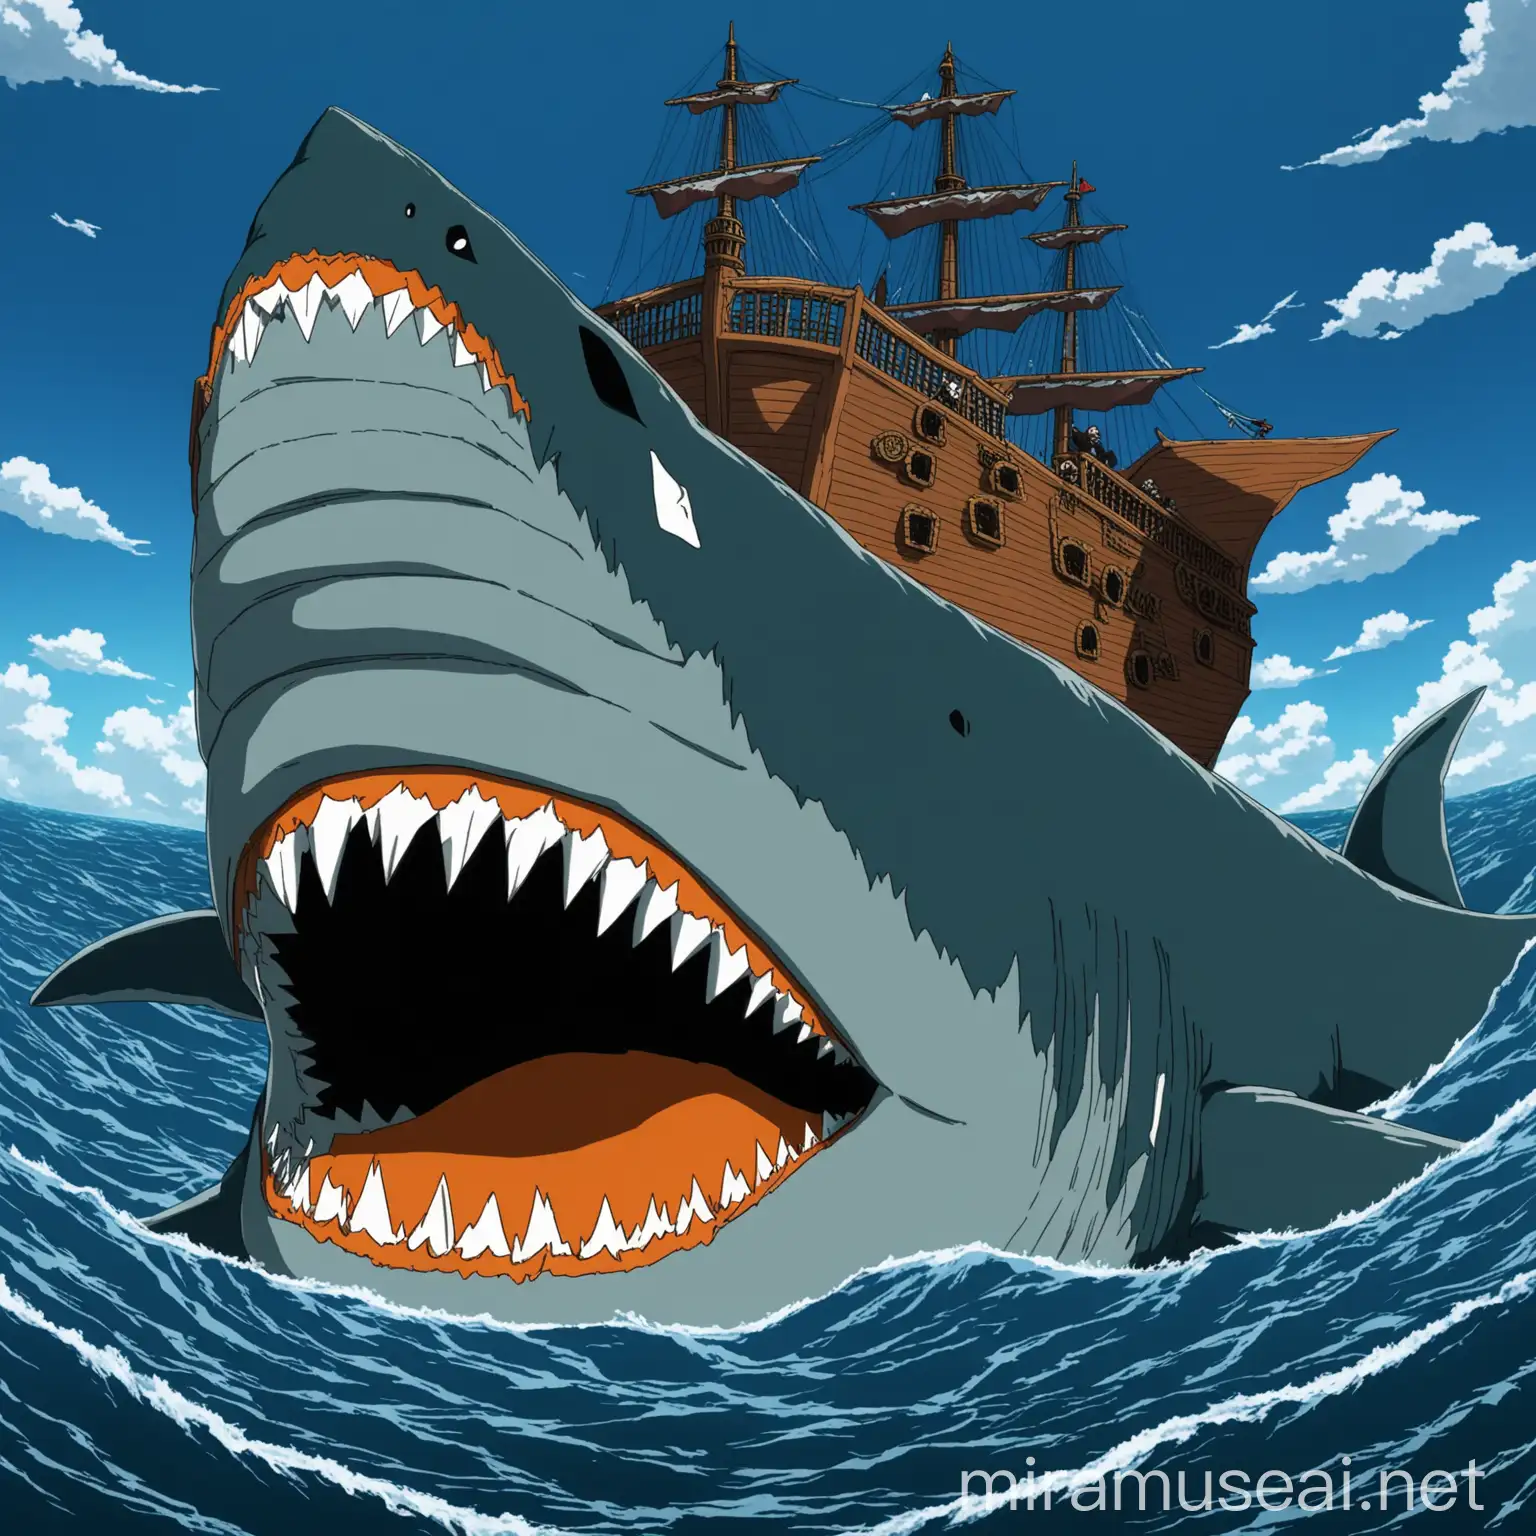 Anime Megalodon Pirate Ship with ThreeEyed Creature in Ocean